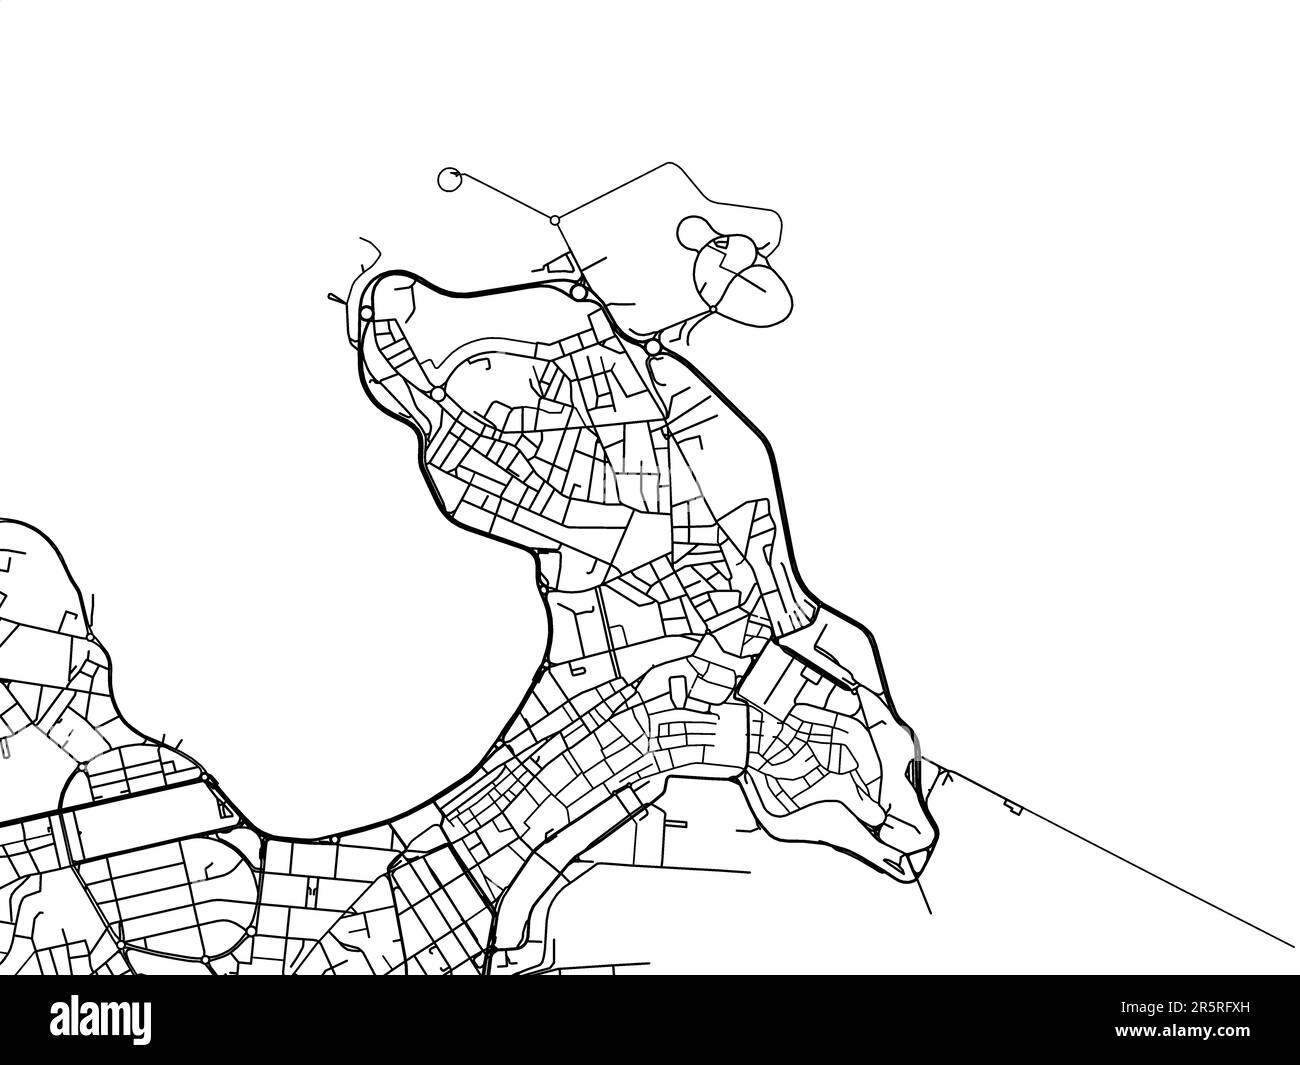 Vector road map of the city of  A Coruna in Spain on a white background. Stock Photo